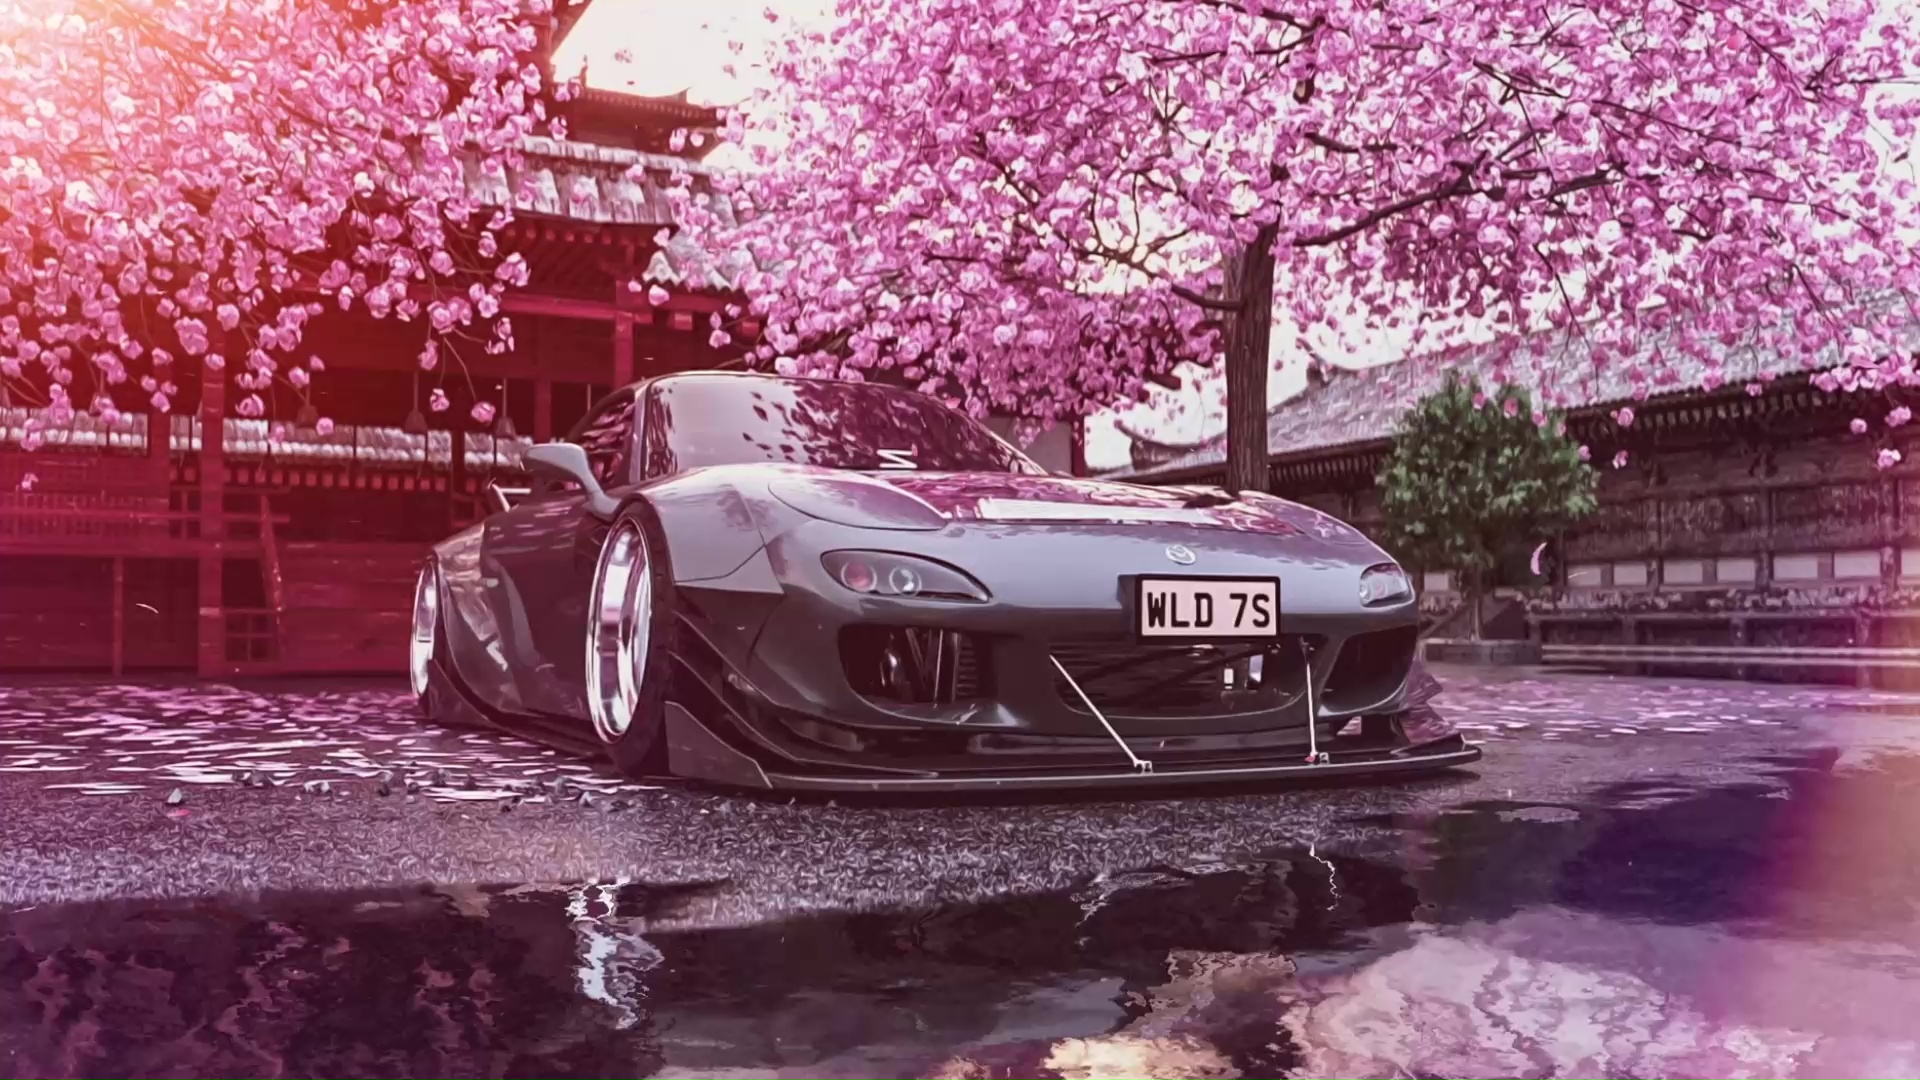 Mazda Rx7 Photos, Download The BEST Free Mazda Rx7 Stock Photos